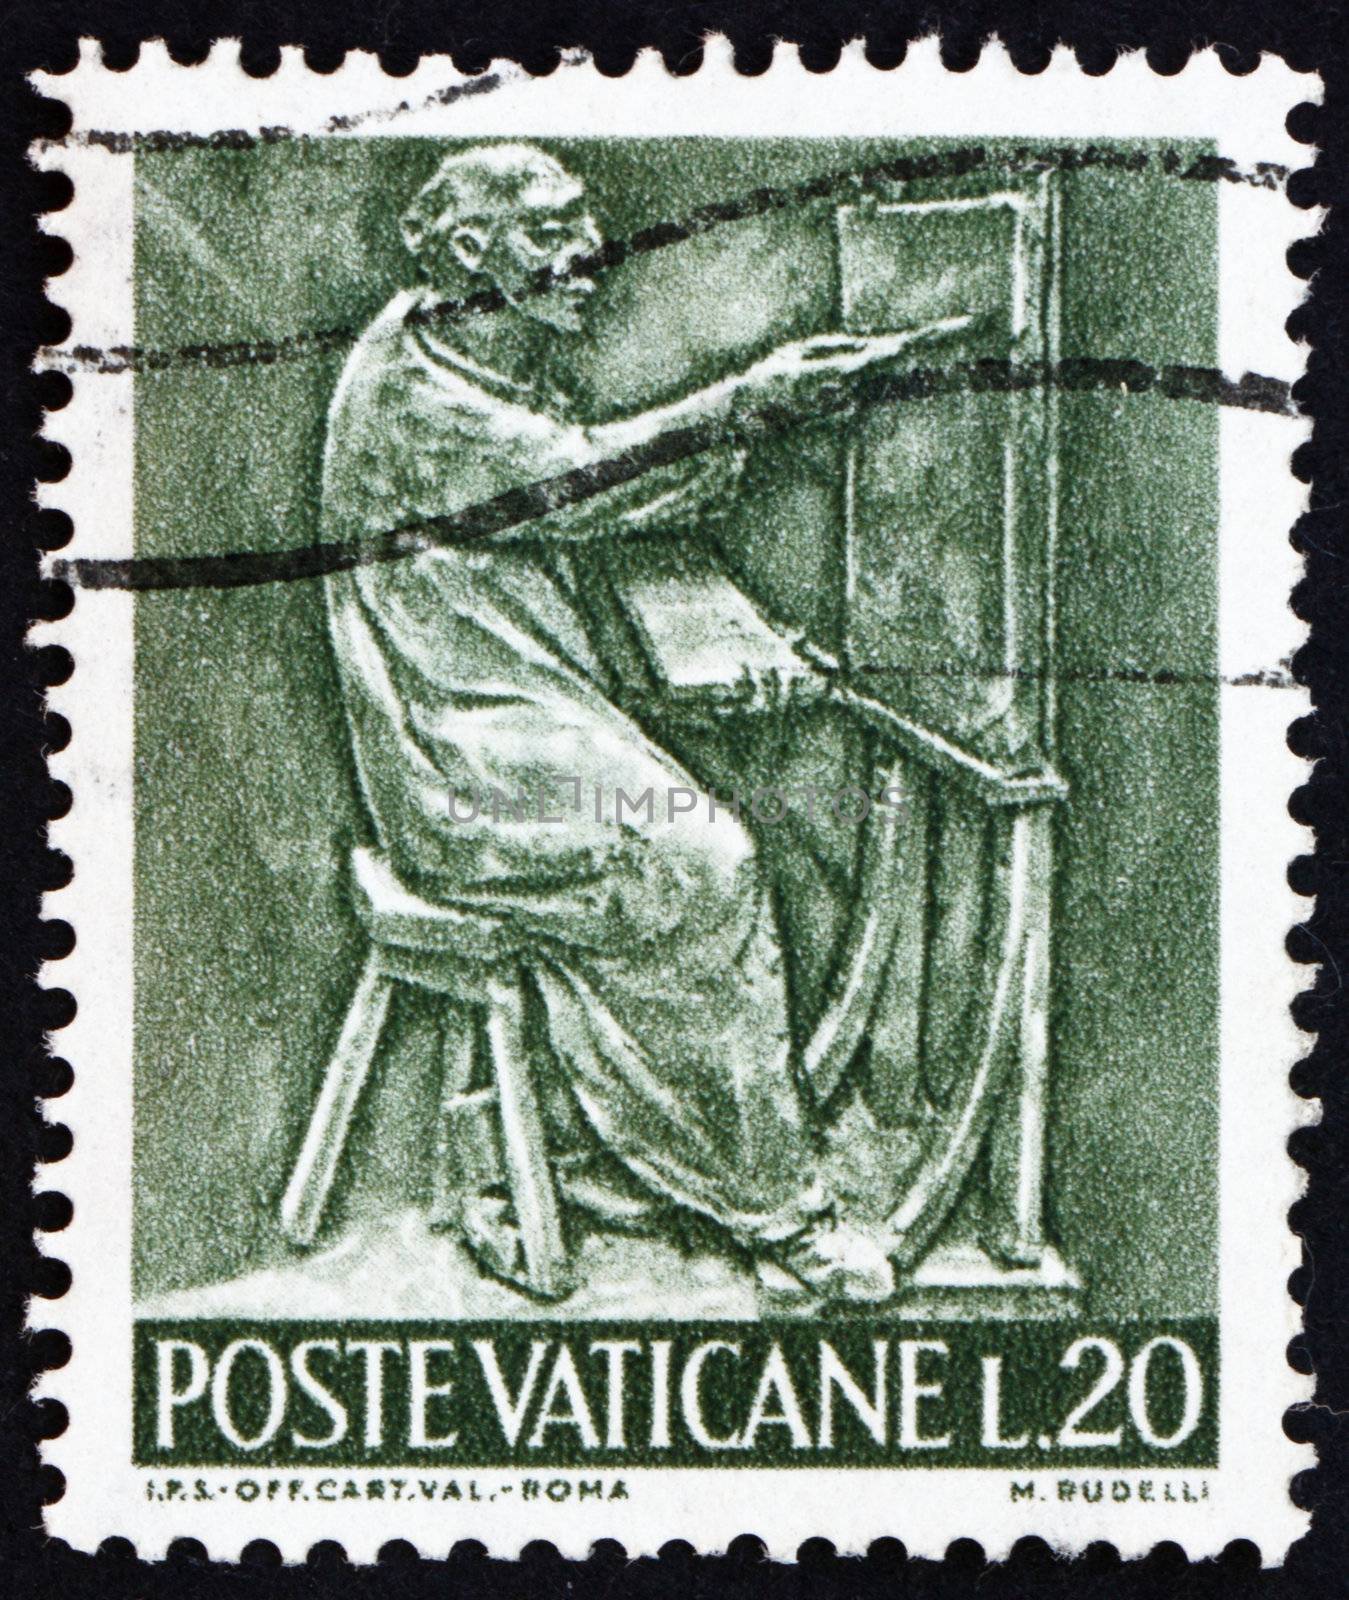 VATICAN - CIRCA 1966: a stamp printed in the Vatican shows Pope Paul VI, Painter, Bas-relief by Mario Rudelli from the Chair in the Pope's Private Chapel, circa 1966